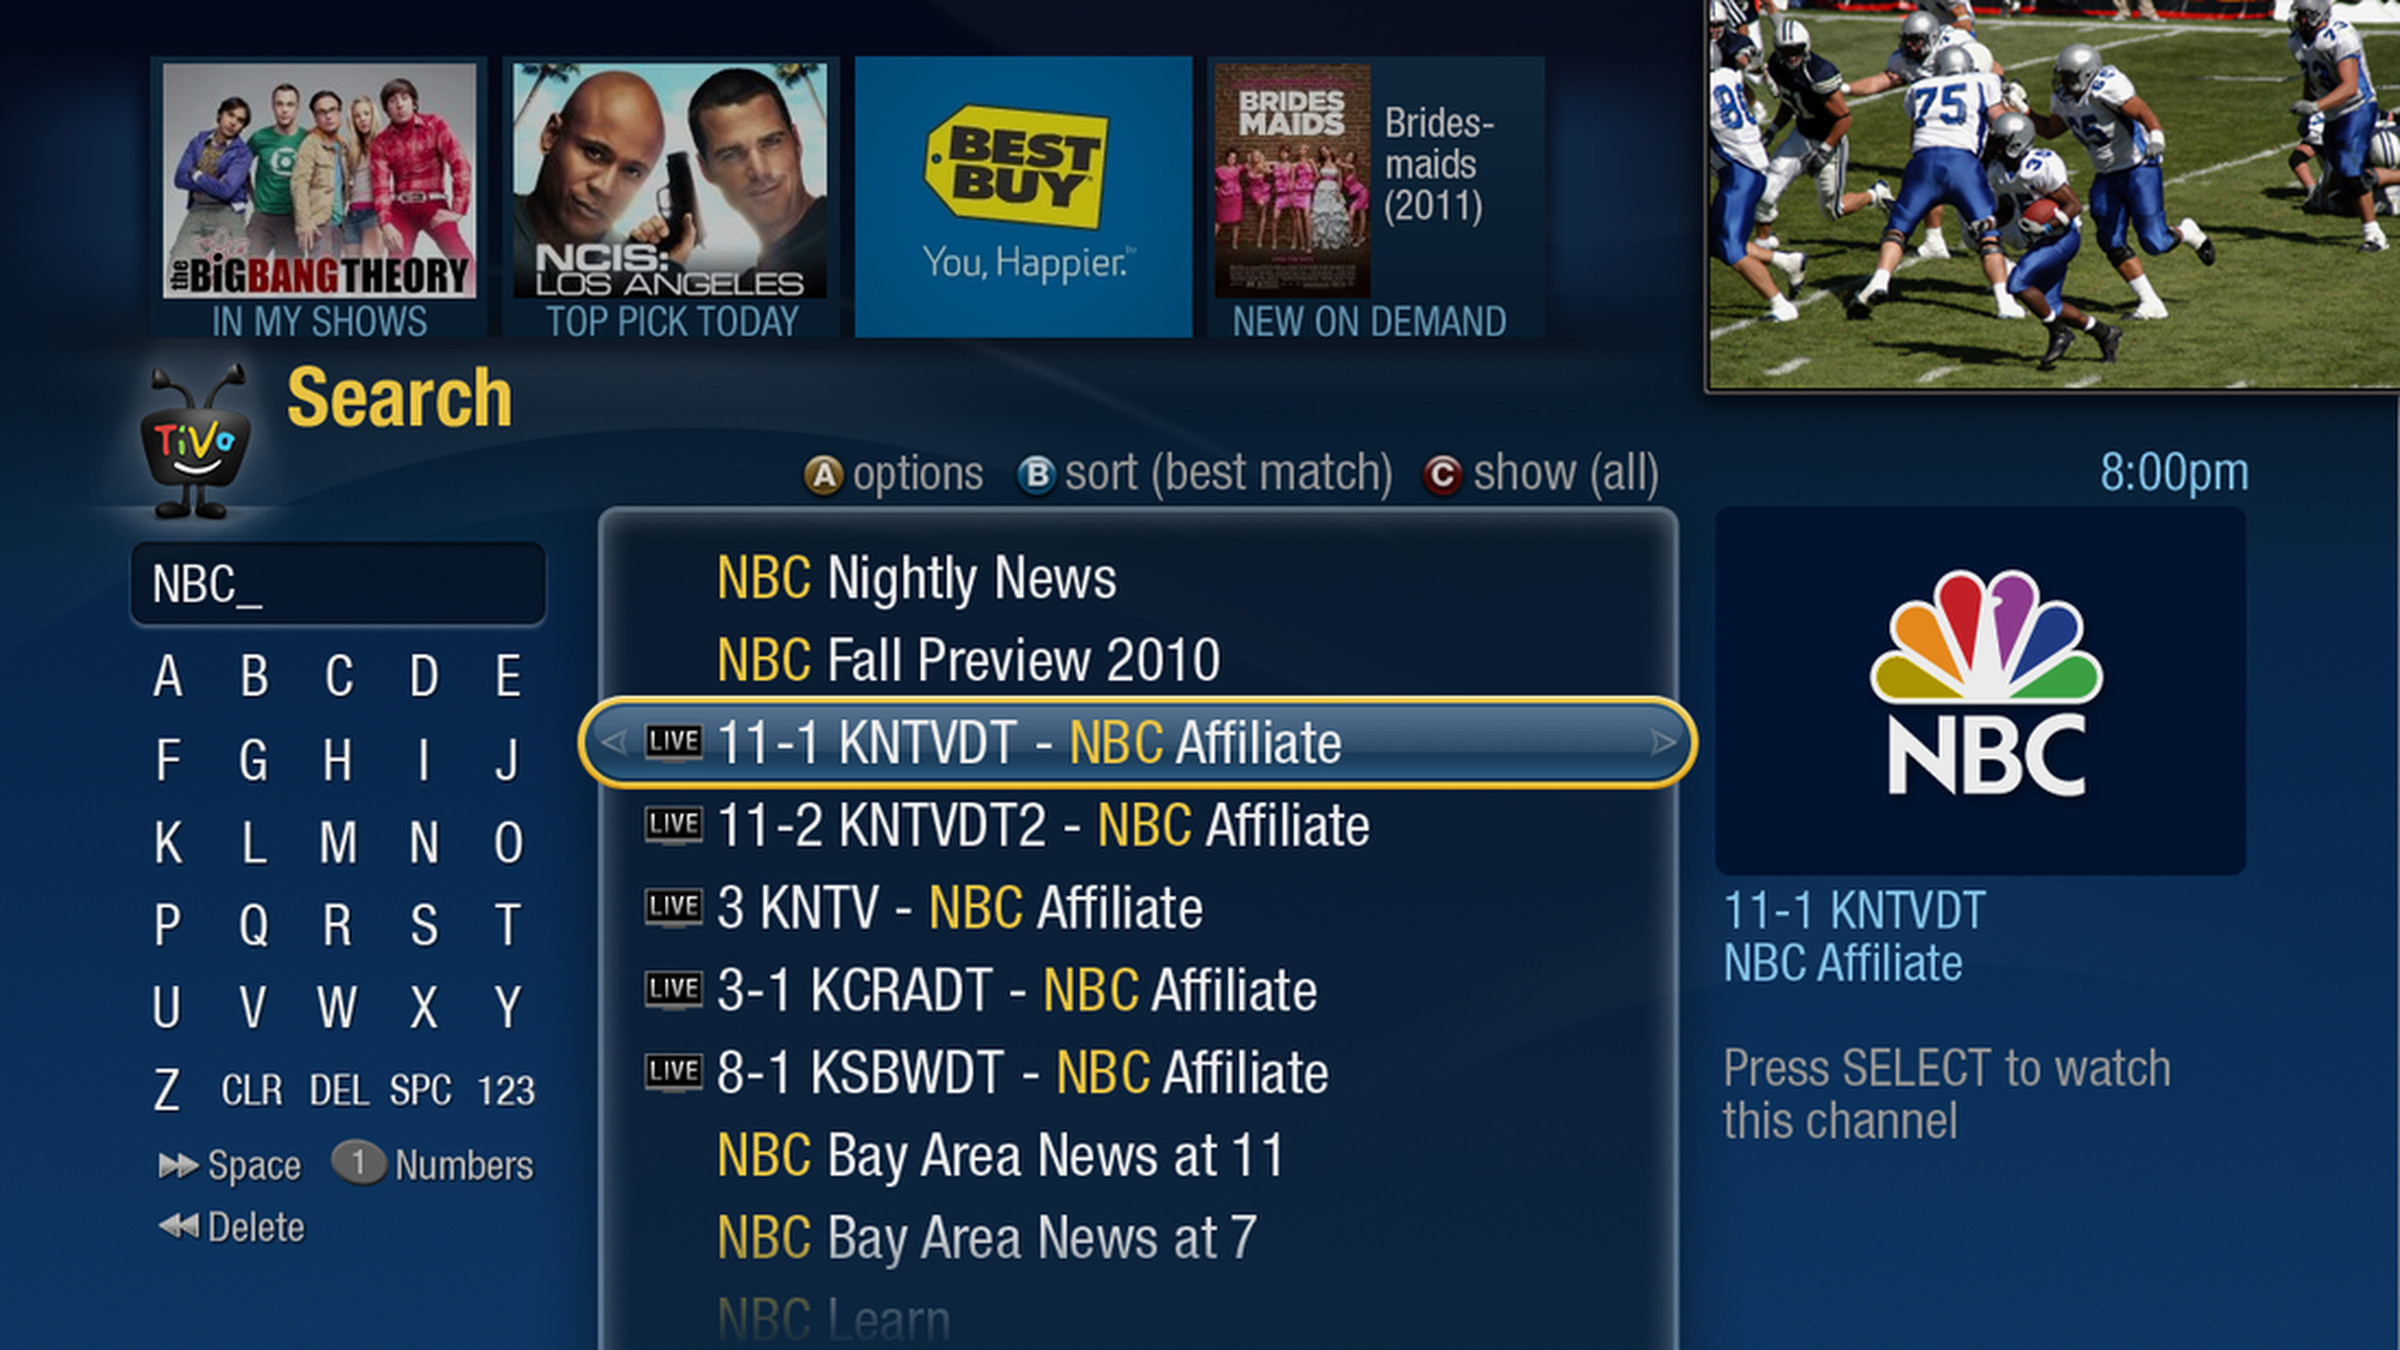 TiVo Premiere January Update Pictures